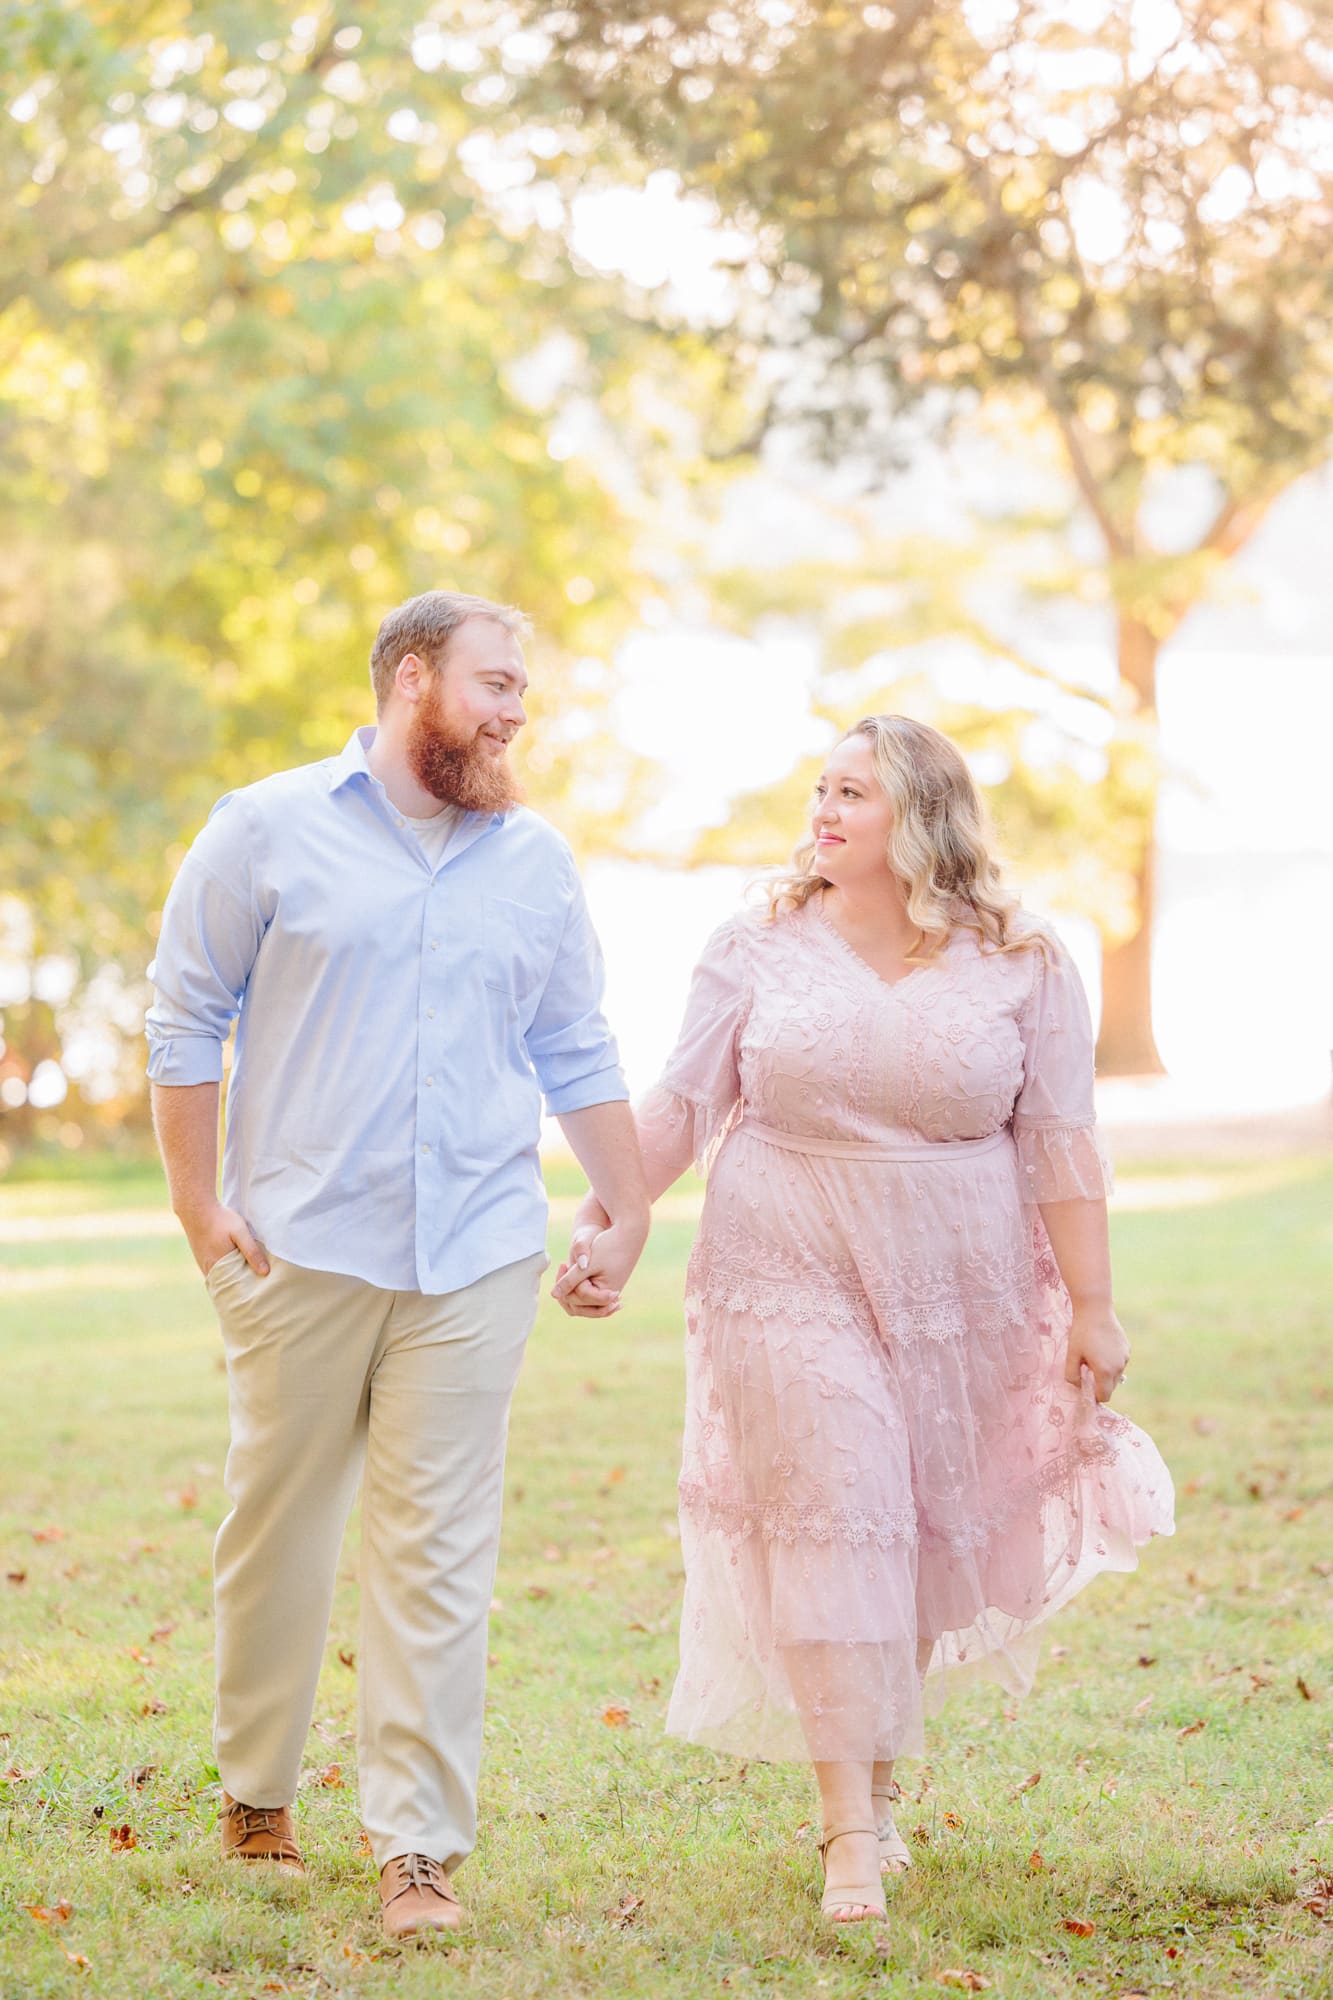 Shawn and Shelby walk hand in hand at the Latta Nature Preserve during their Huntersville engagement session.